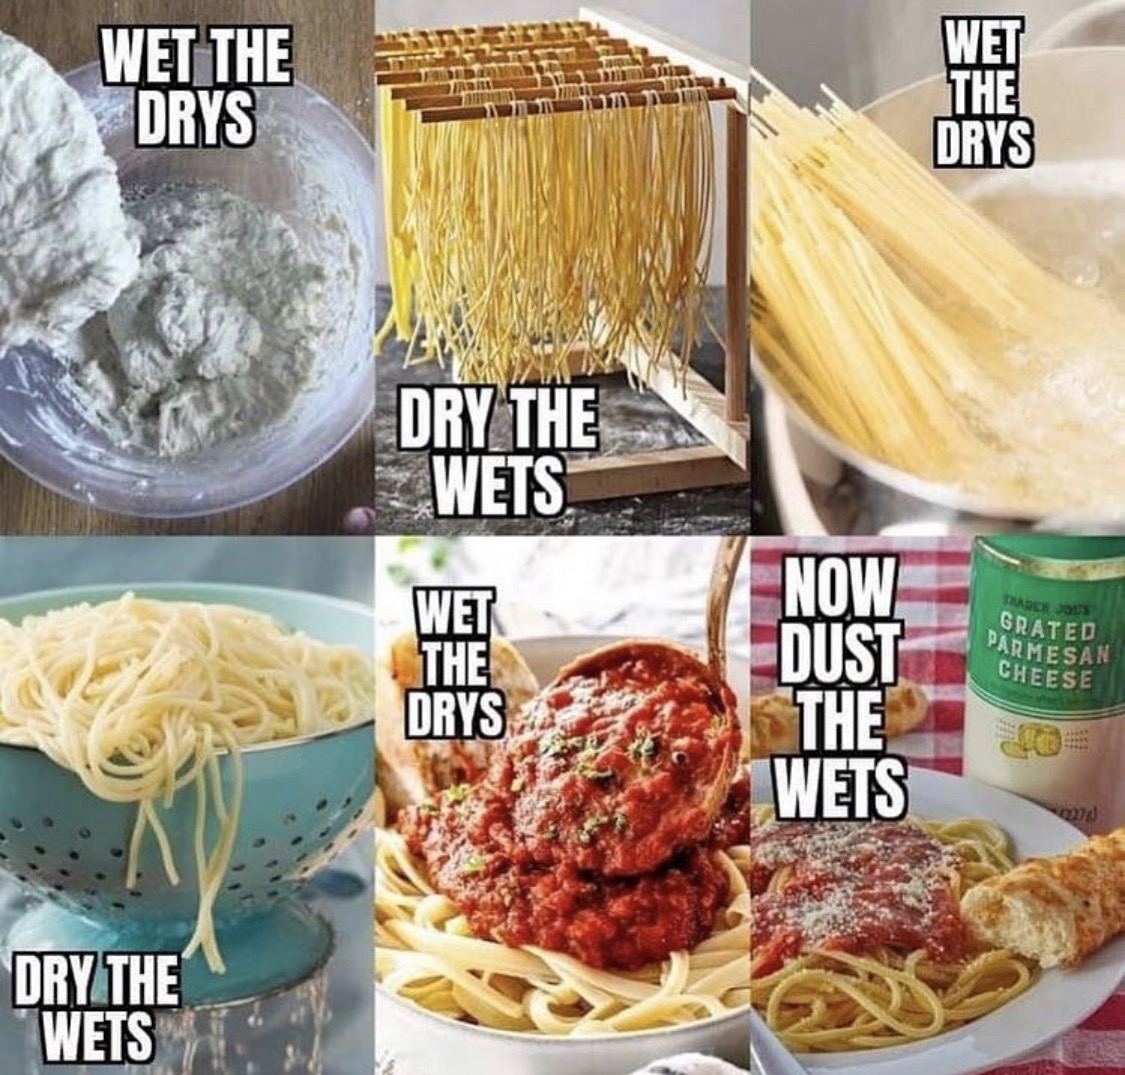 dank memes - Spaghetti - Wet The Drys Wet The Drys Dry The Wets Radek JO1 Wet The Drys Grated Parmesan Cheese Now Dust The Wets Dry The Wets